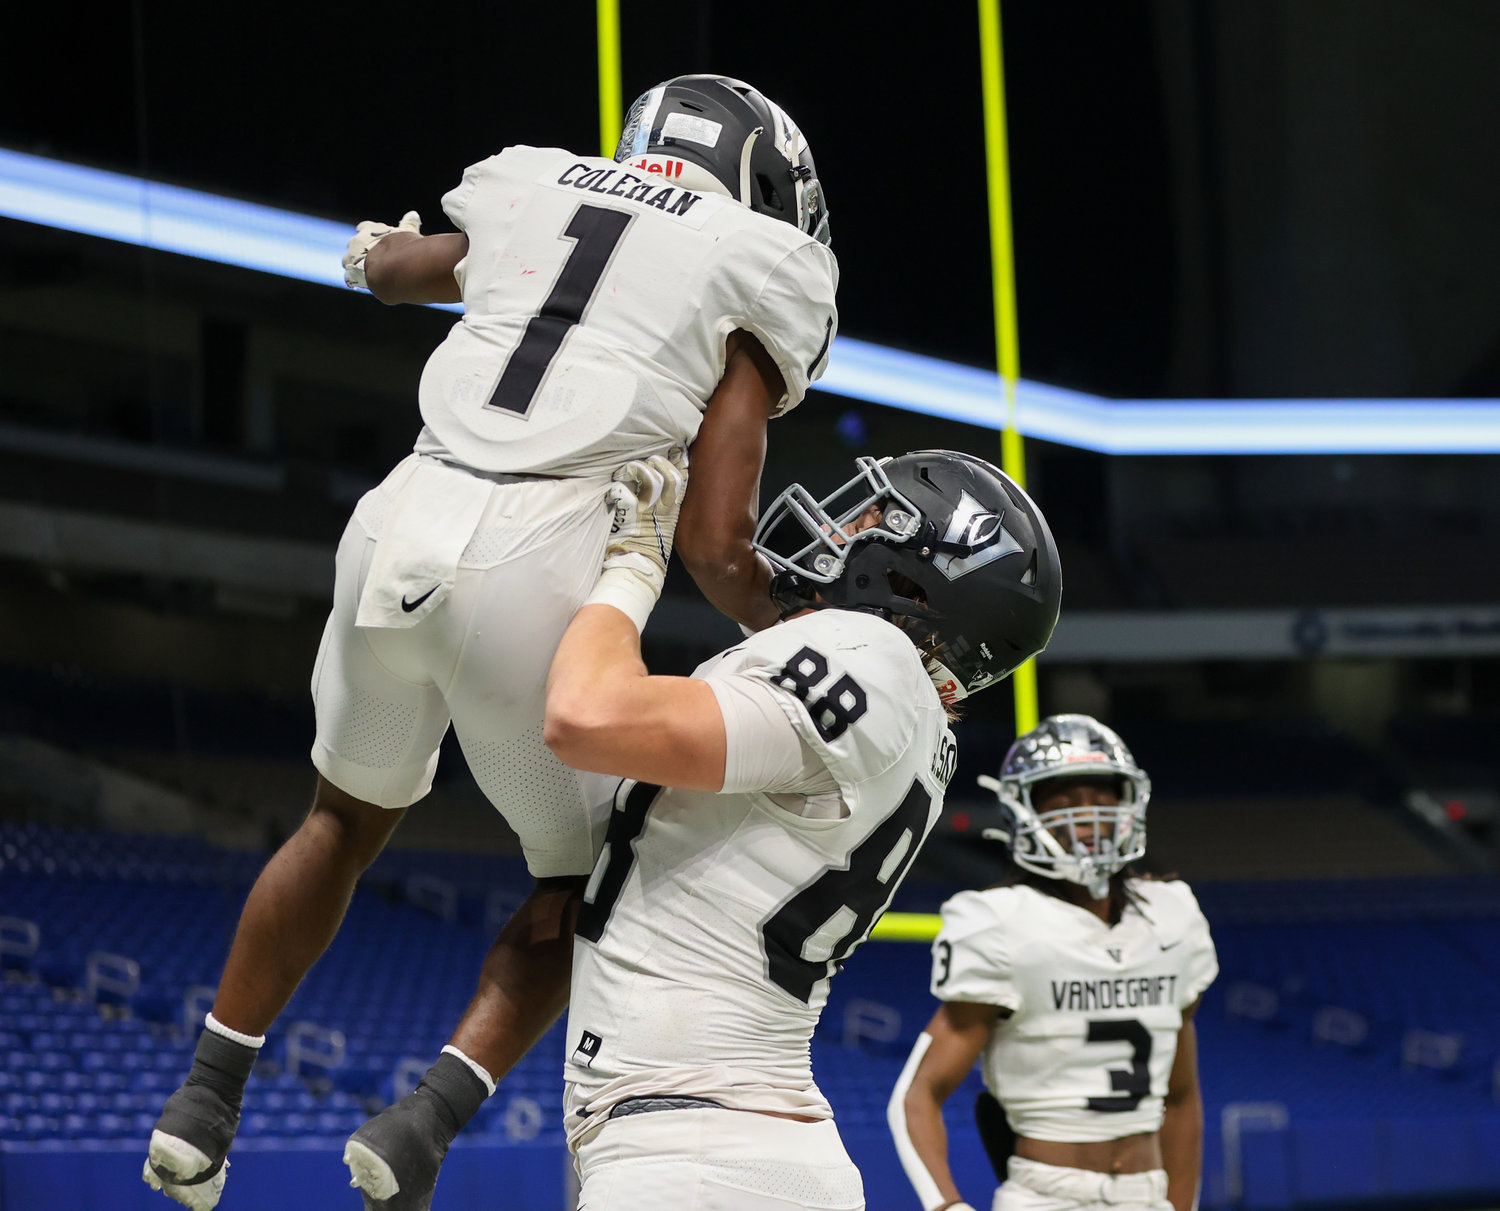 Vandegrift Vipers junior tight end Jase Skoglund (88) and Vandegrift celebrate after a touchdown during the Class 6A-DII state semifinal football game between Katy and Vandegrift on Dec. 10, 2022 in San Antonio.